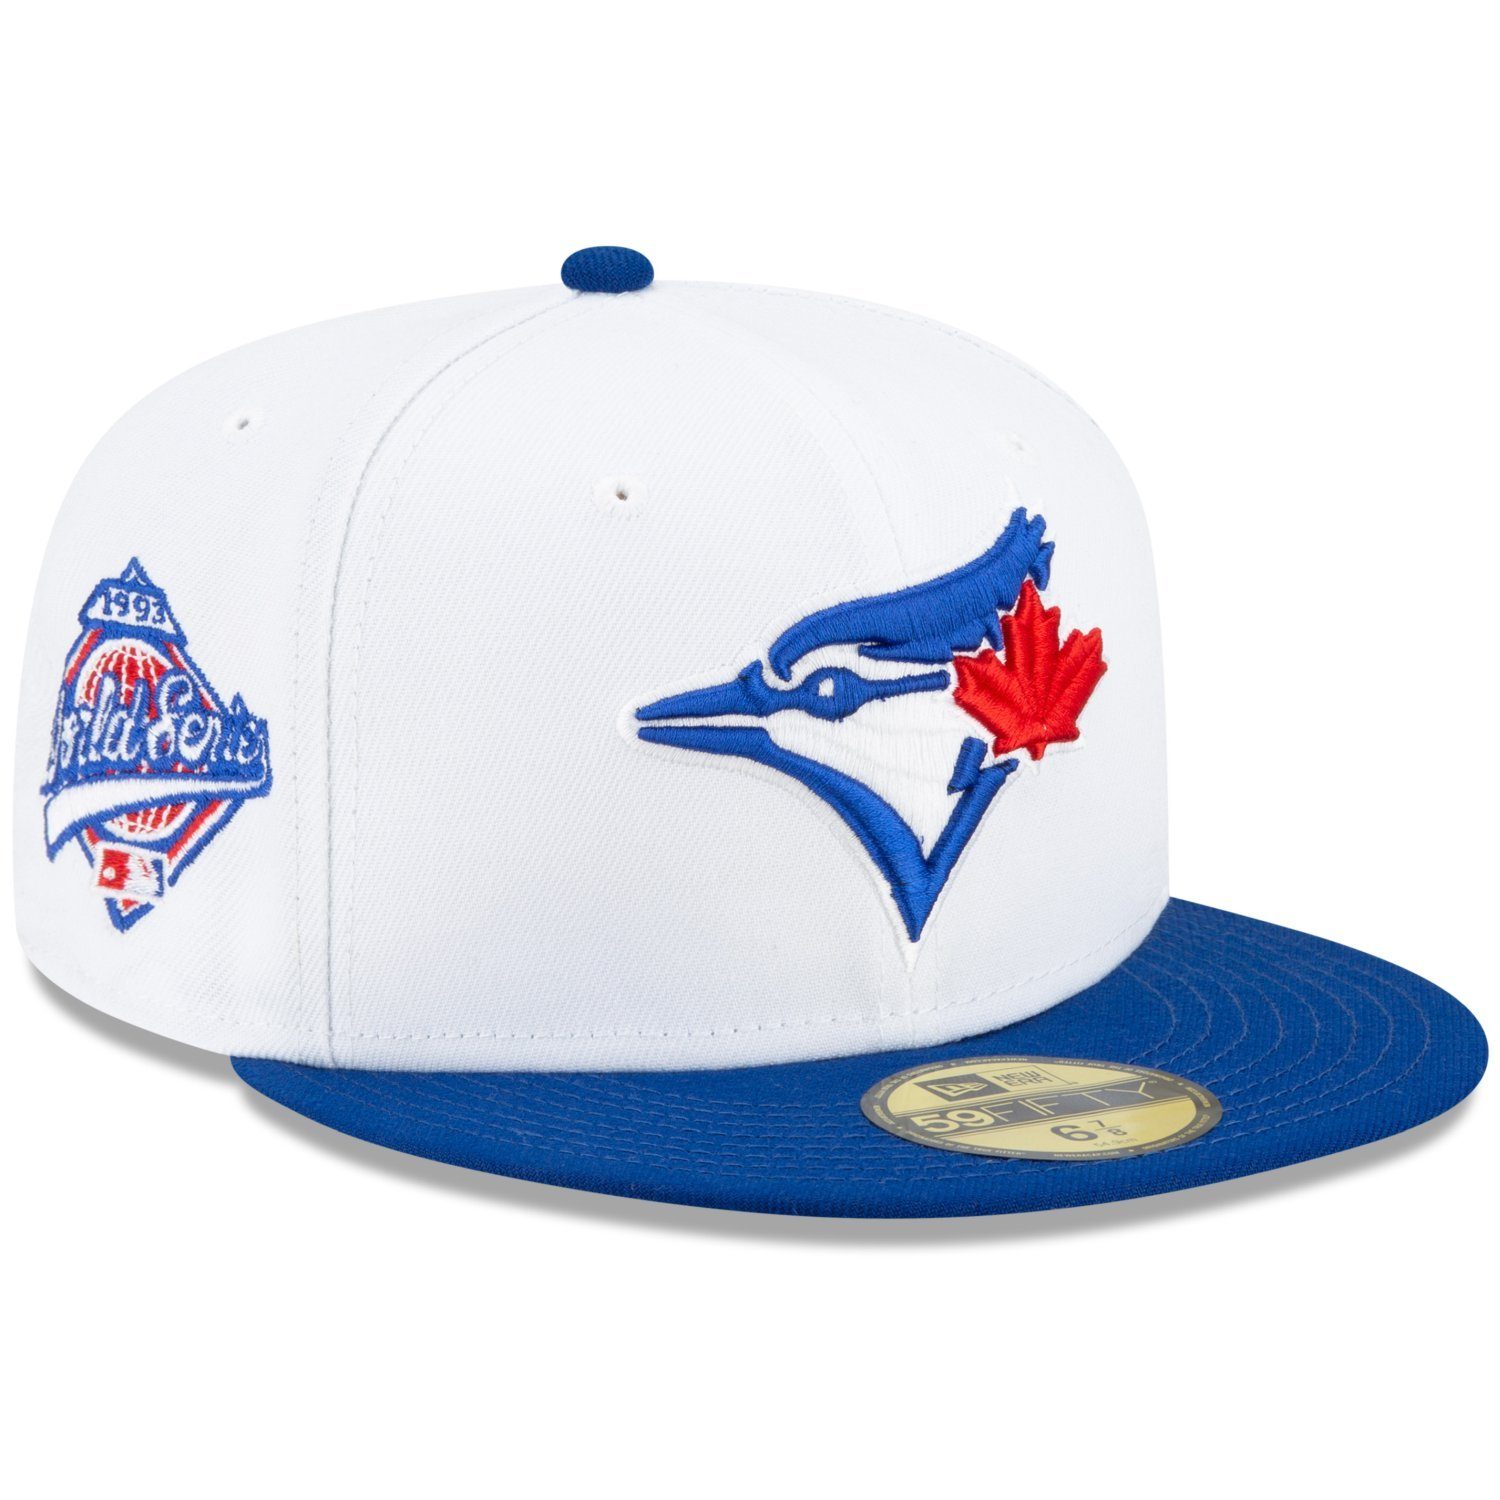 New Era Fitted Cap 59Fifty WORLD SERIES 1993 Toronto Jays | Fitted Caps